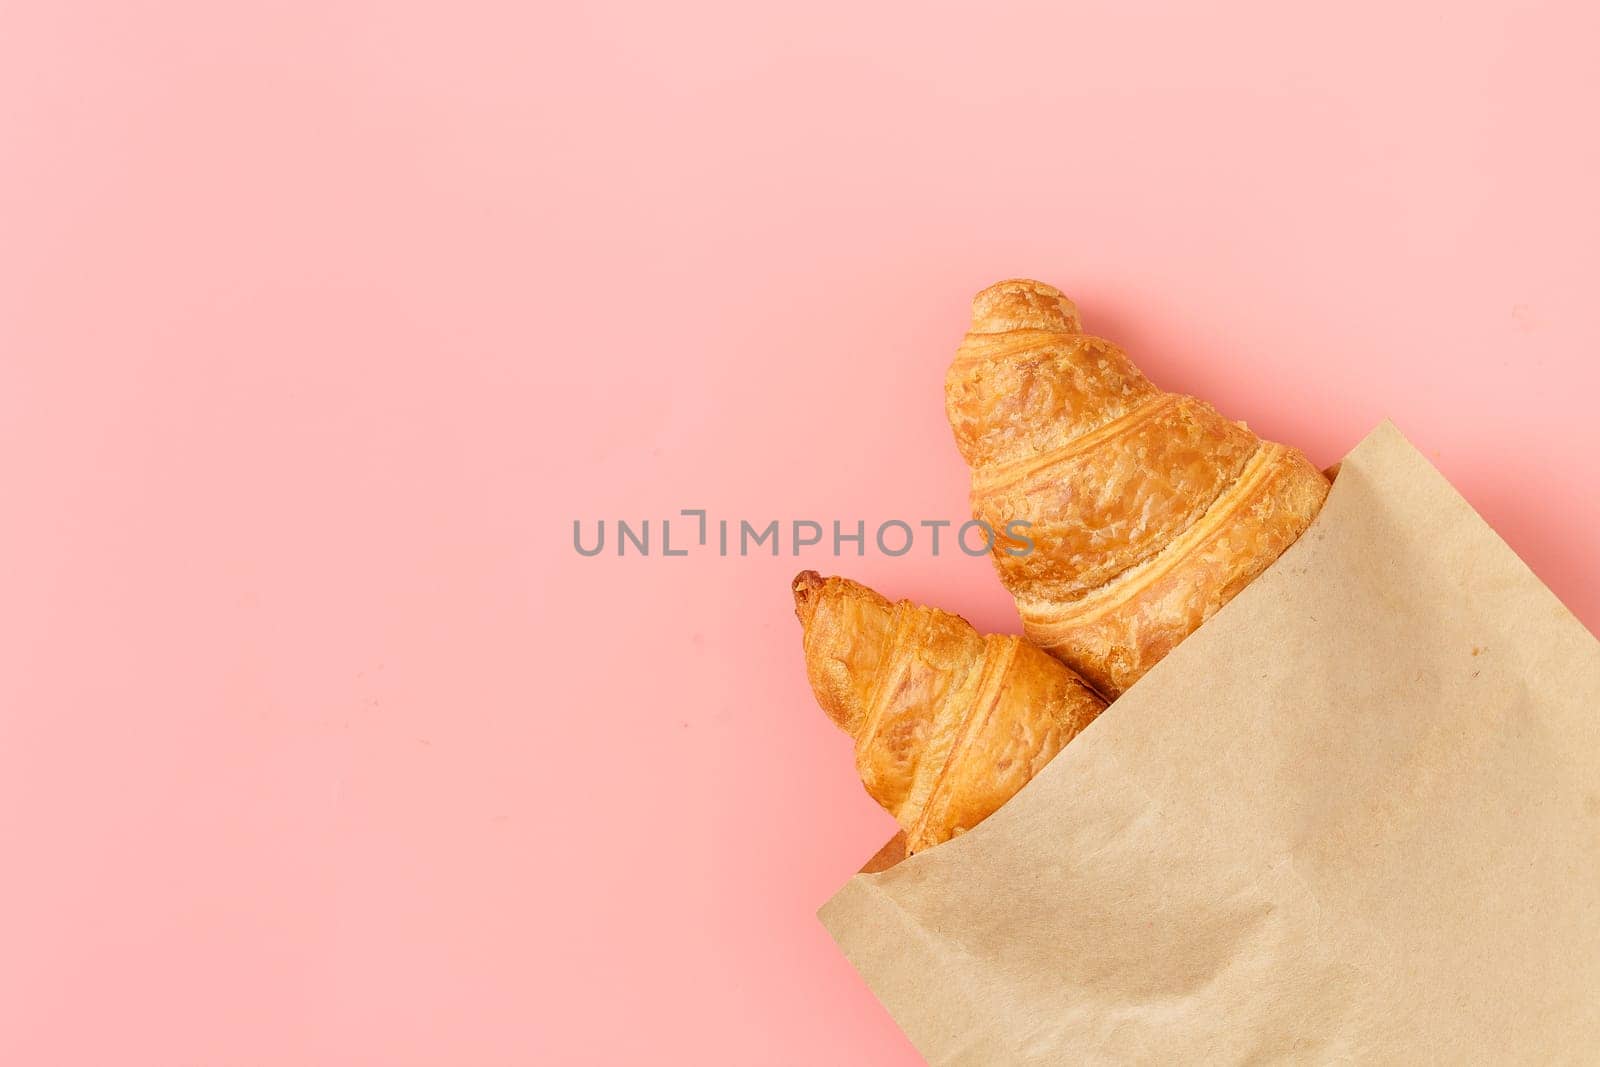 Delicious croissants in a package on a pink background. french pastries. copy space.